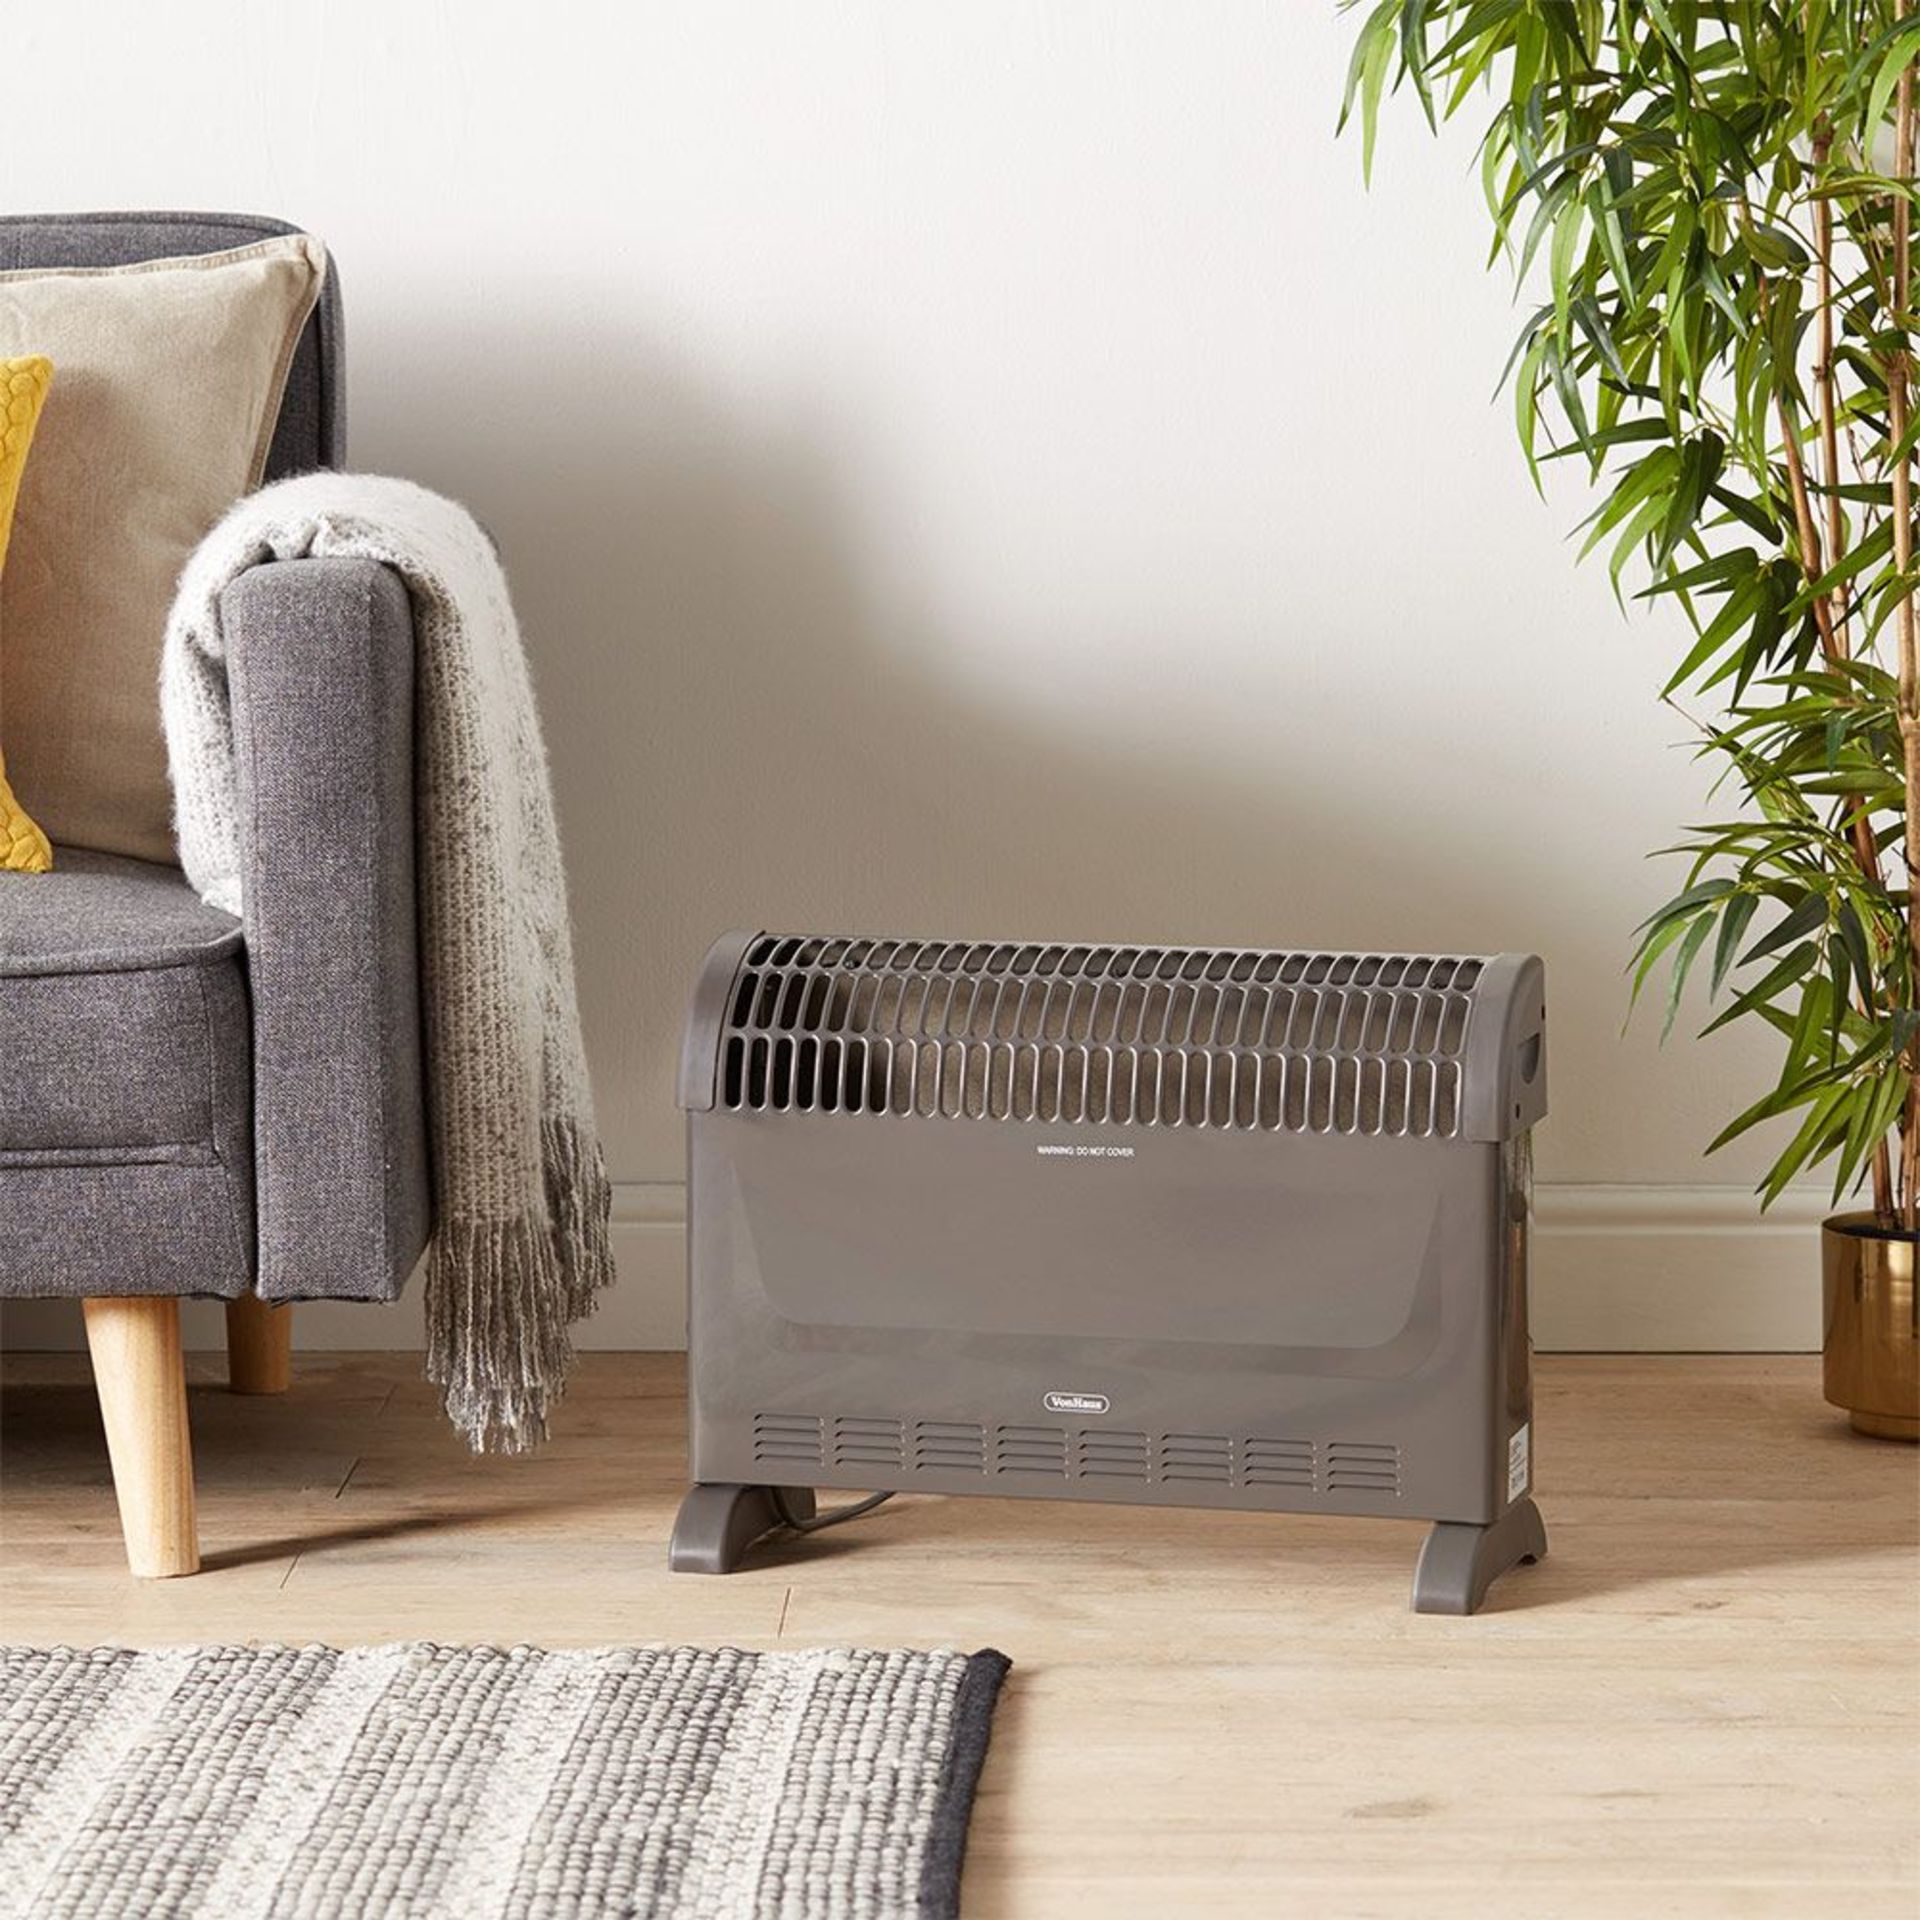 (H134) 2000W Convector Heater Handy and portable, this freestanding convector heater delivers ...(